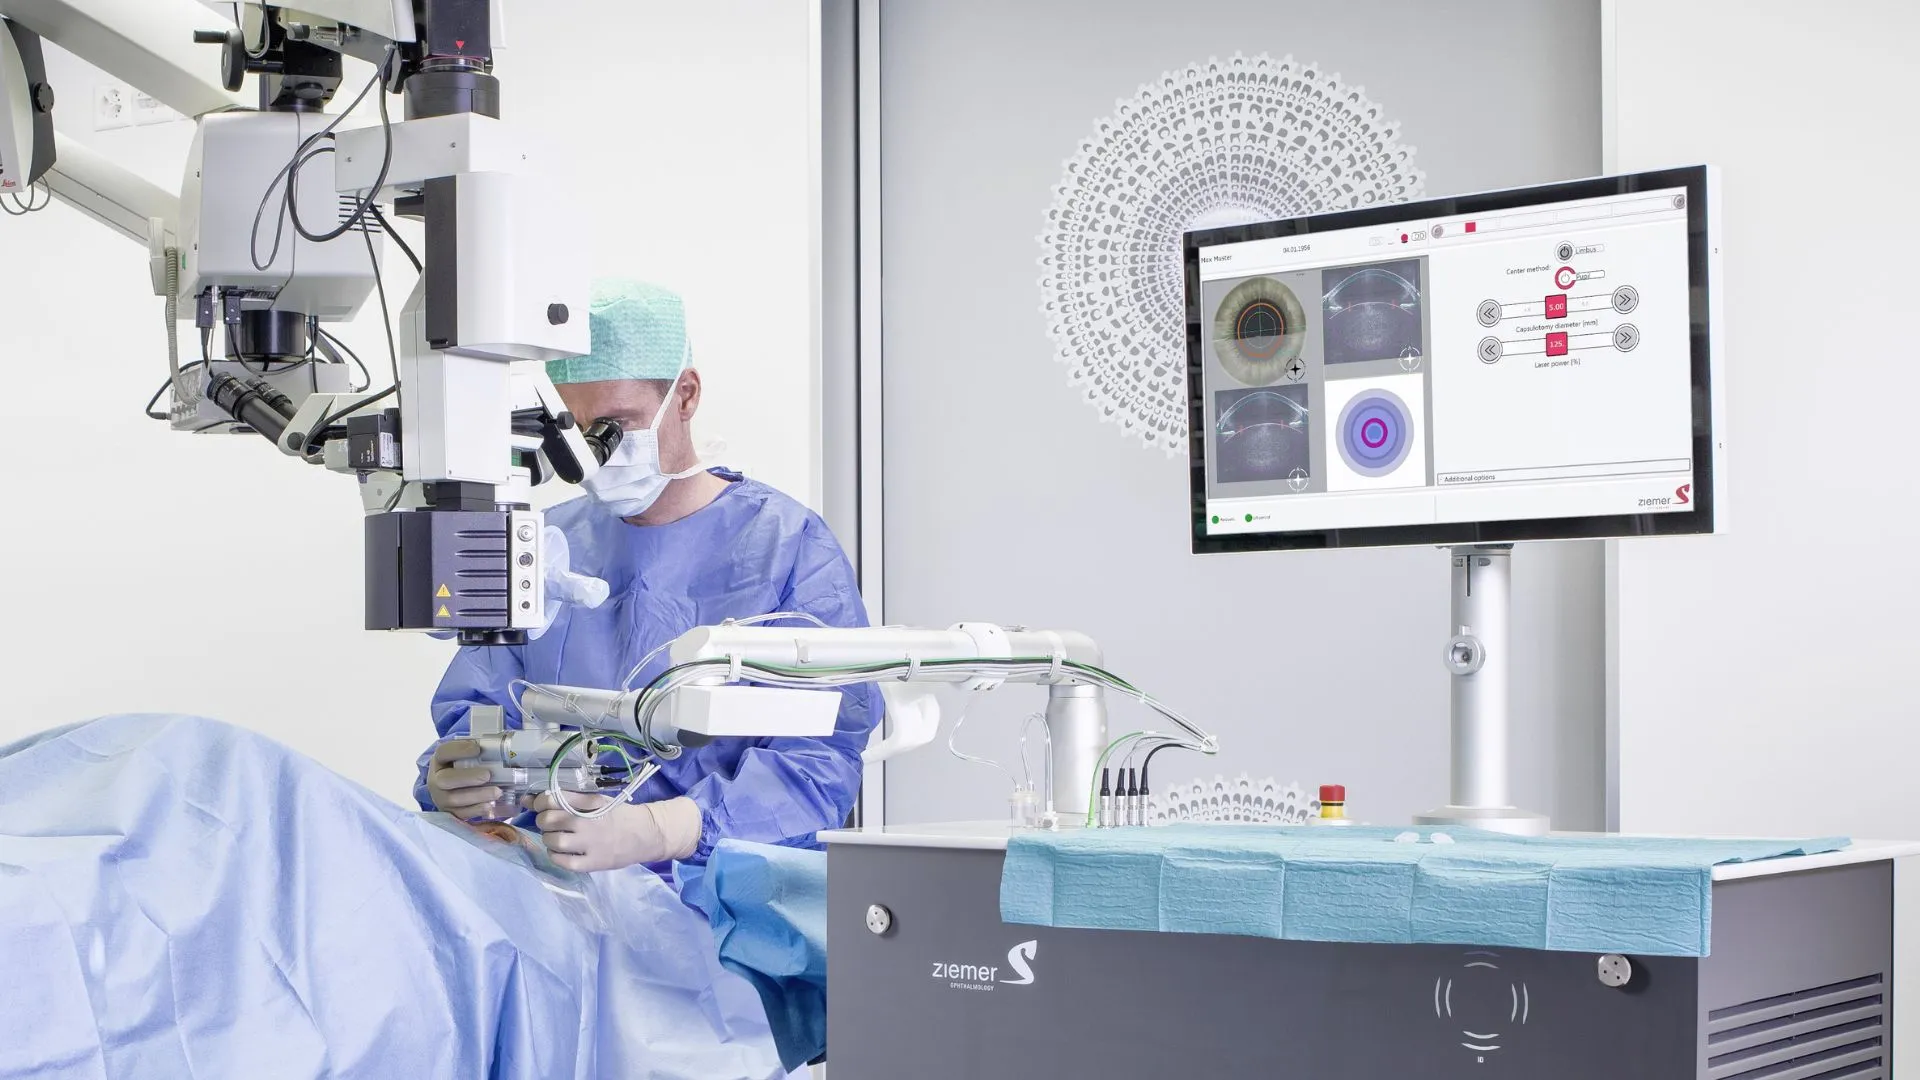 Femtosecond Laser Assisted Cataract Treatment (FLACs)